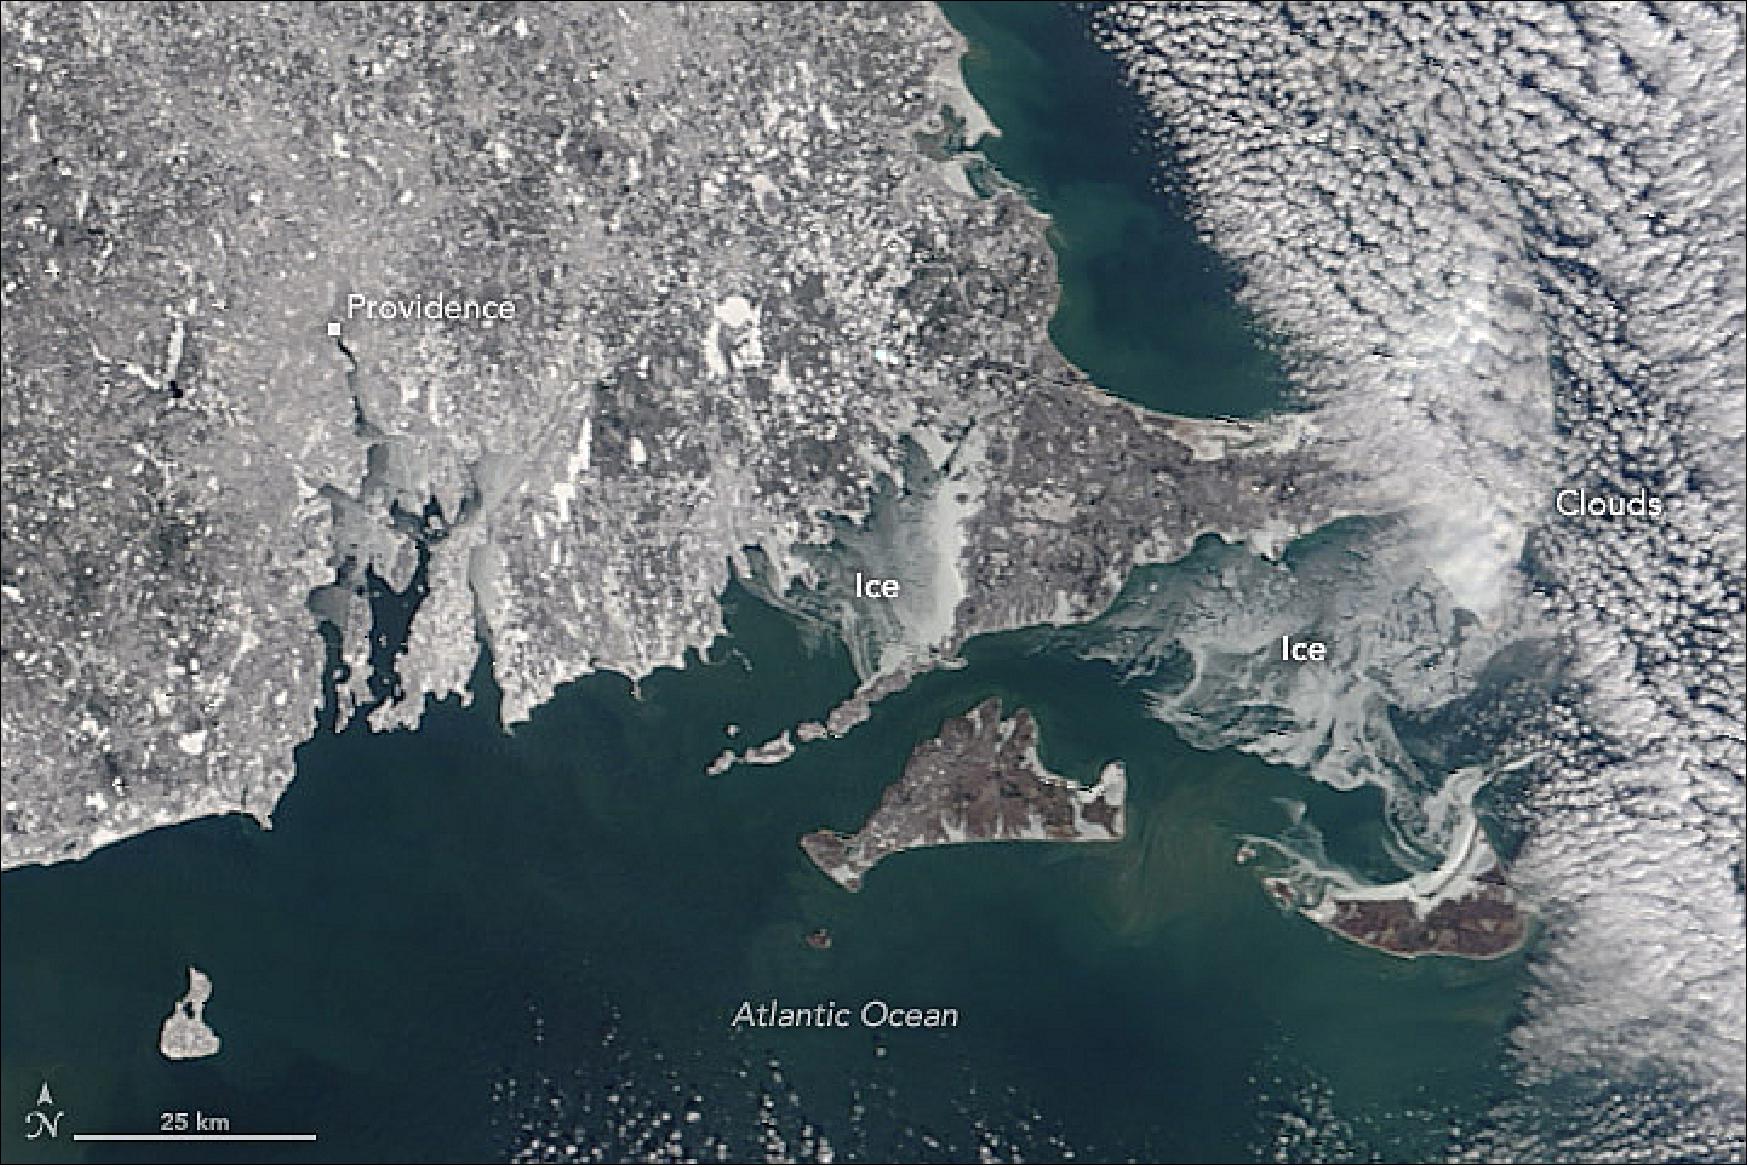 Figure 45: MODIS image of Rhode Island and southeastern Massachusetts, with ice in Buzzards Bay and Nantucket Sound, acquired on 7 Jan. 2018 (image credit: NASA image by Jeff Schmaltz, LANCE/EOSDIS Rapid Response. Image cropping and caption by Adam Voiland)